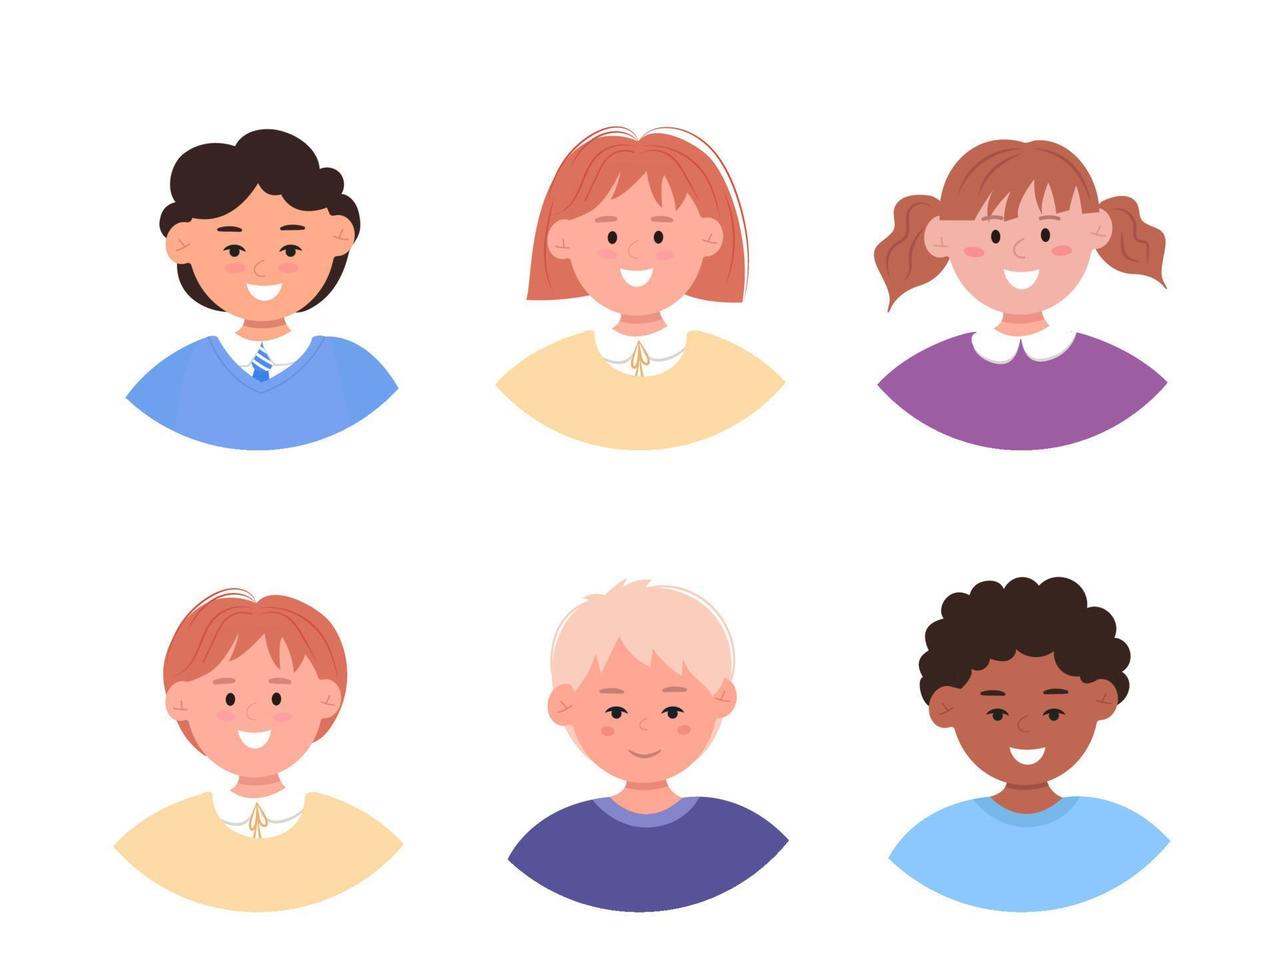 Set of children avatars. Bundle of smiling faces of boys and girls with different hairstyles vector